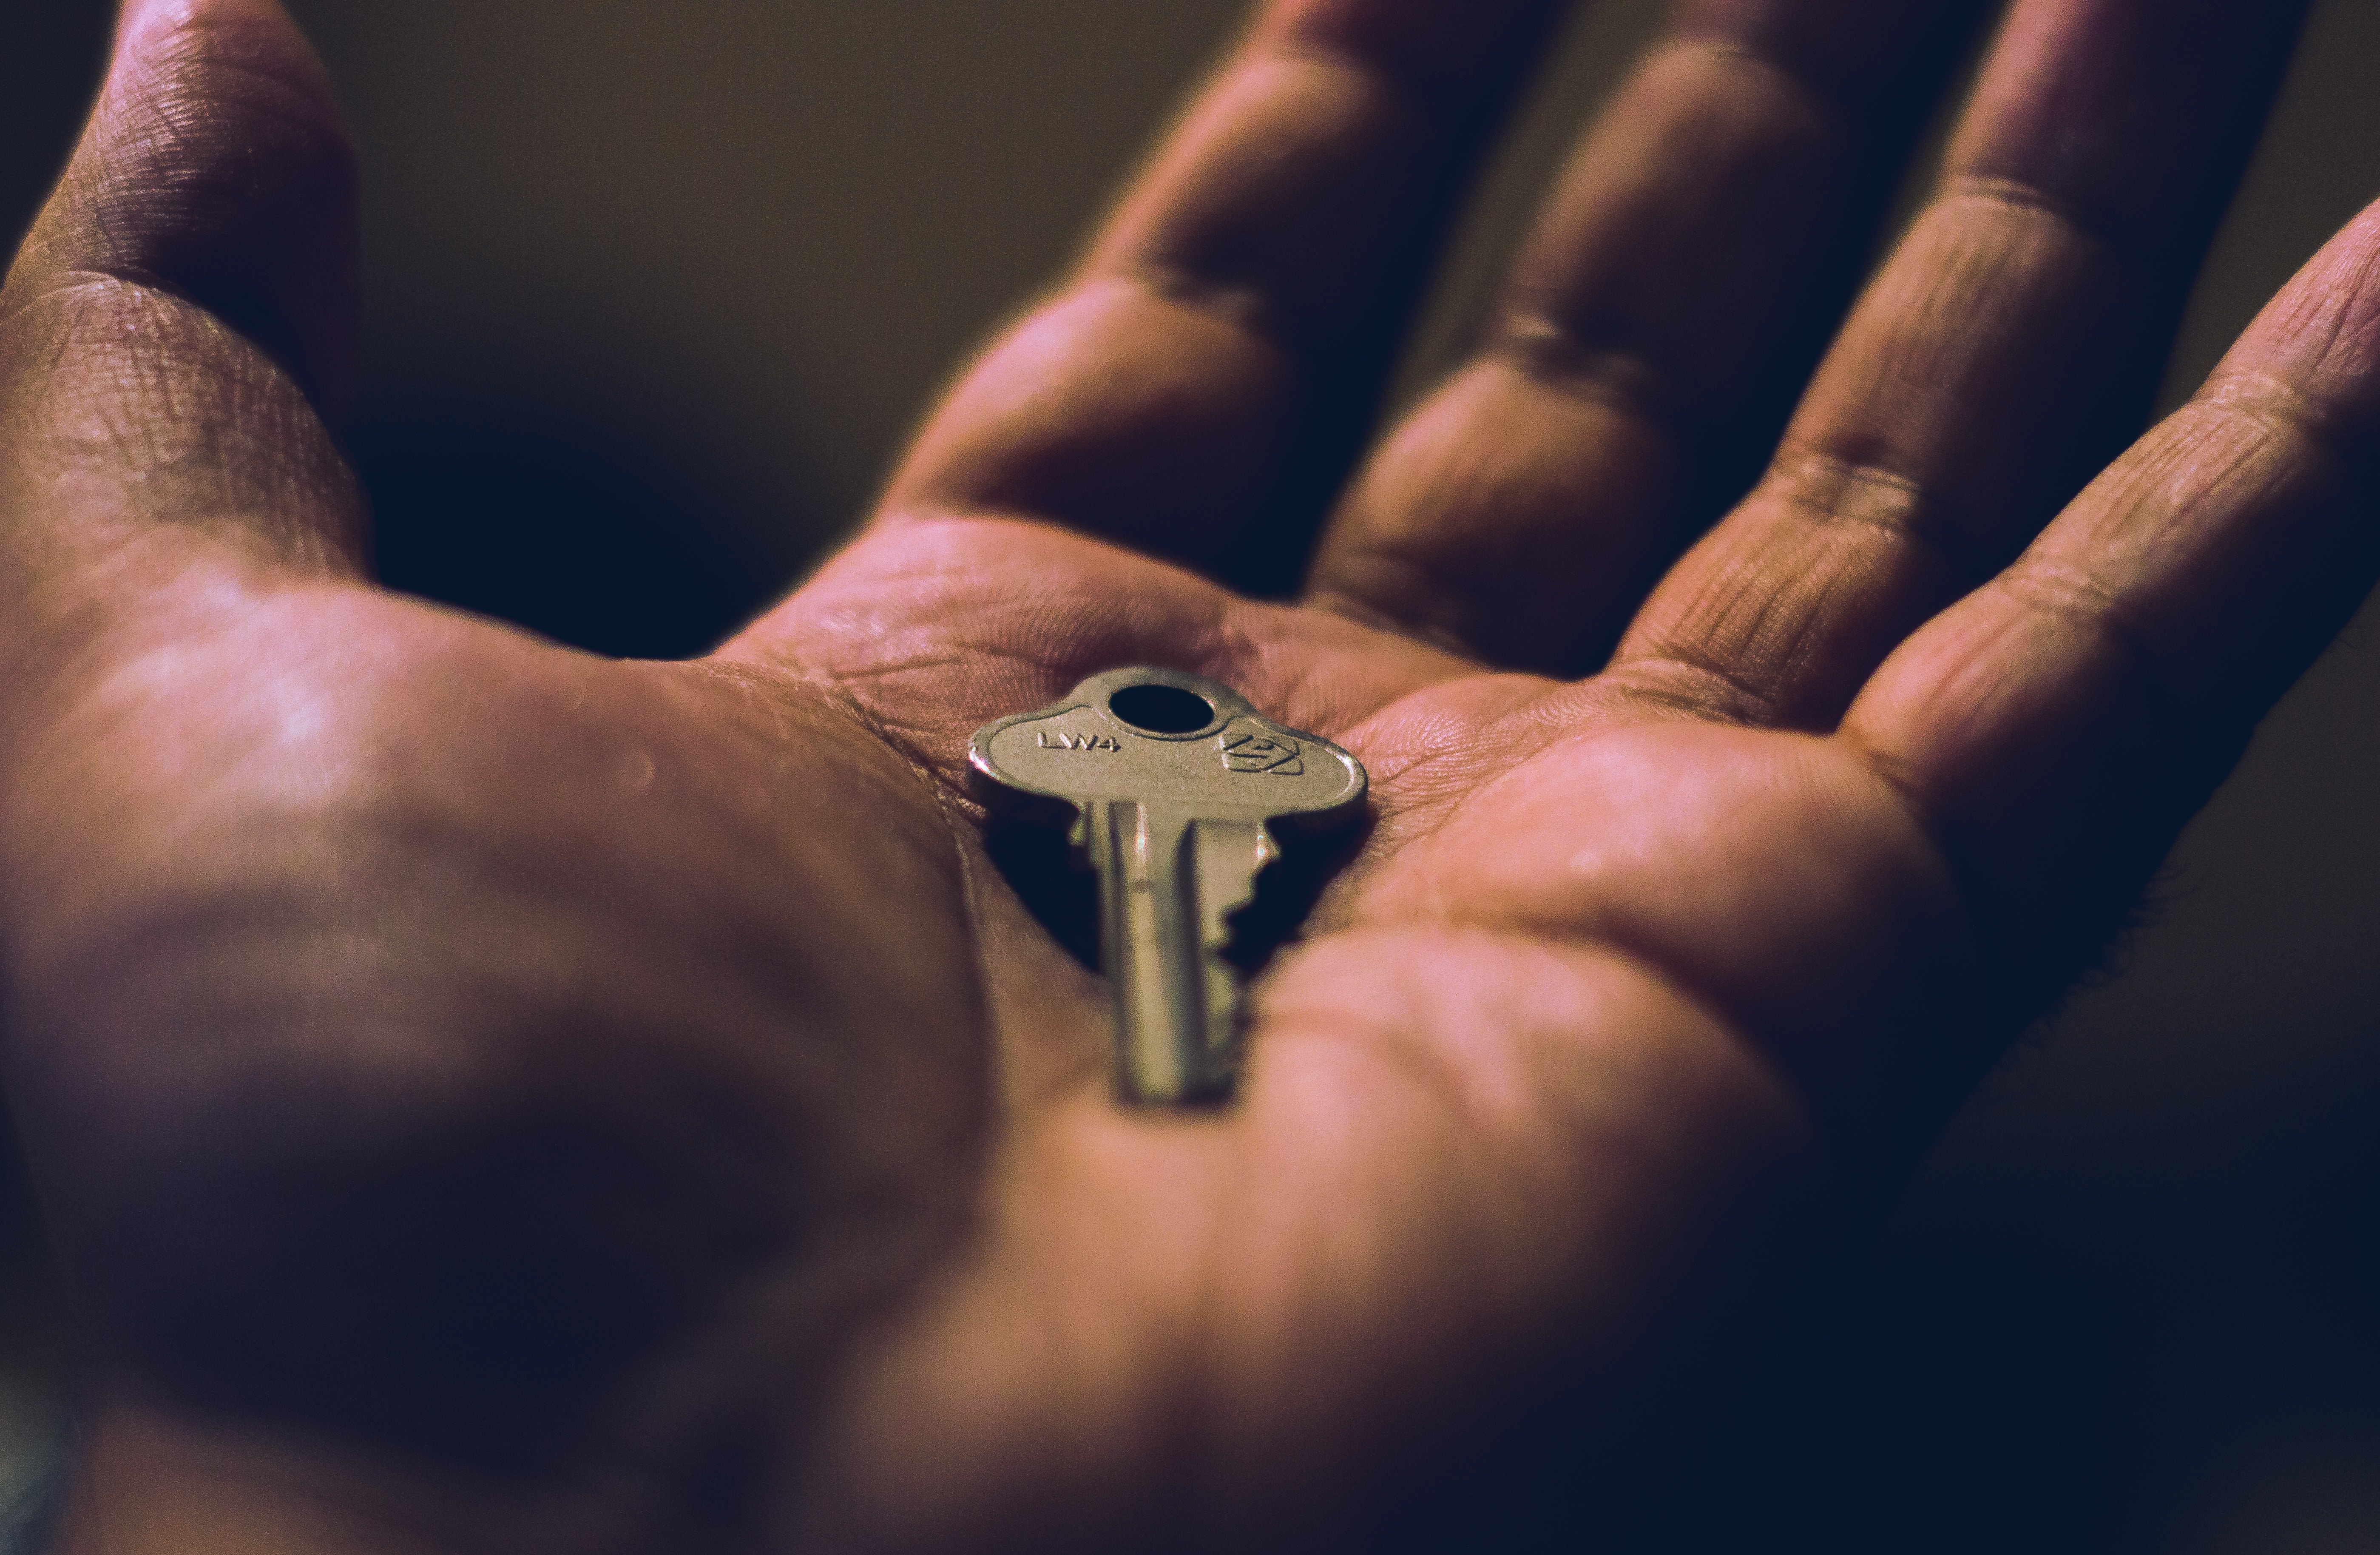 A key in a hand